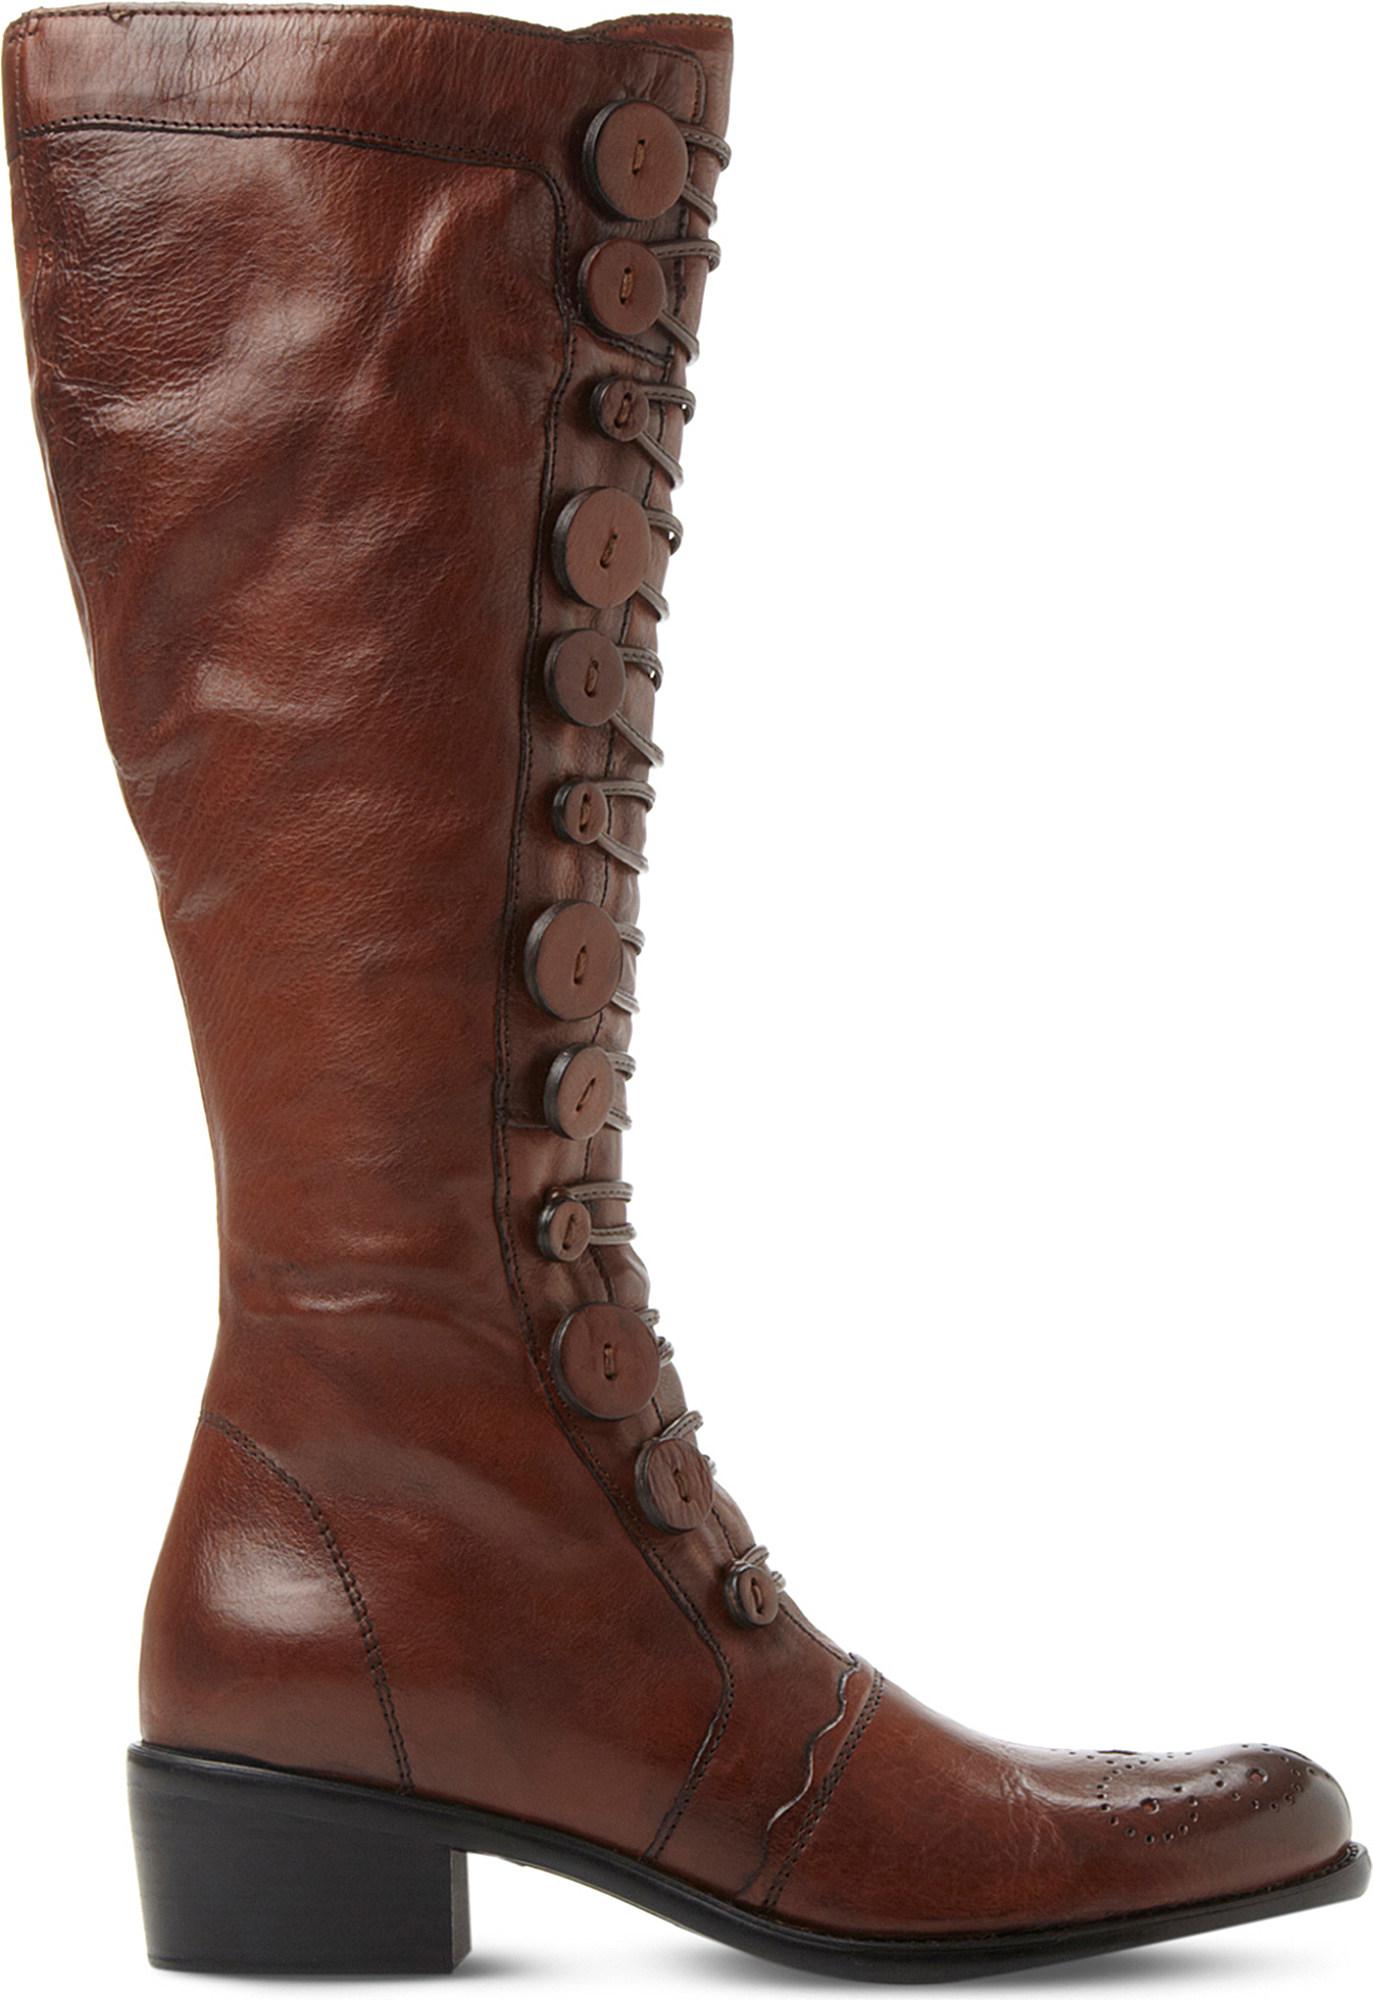 Dune Pixie D Leather Knee-high Boots in Brown - Lyst